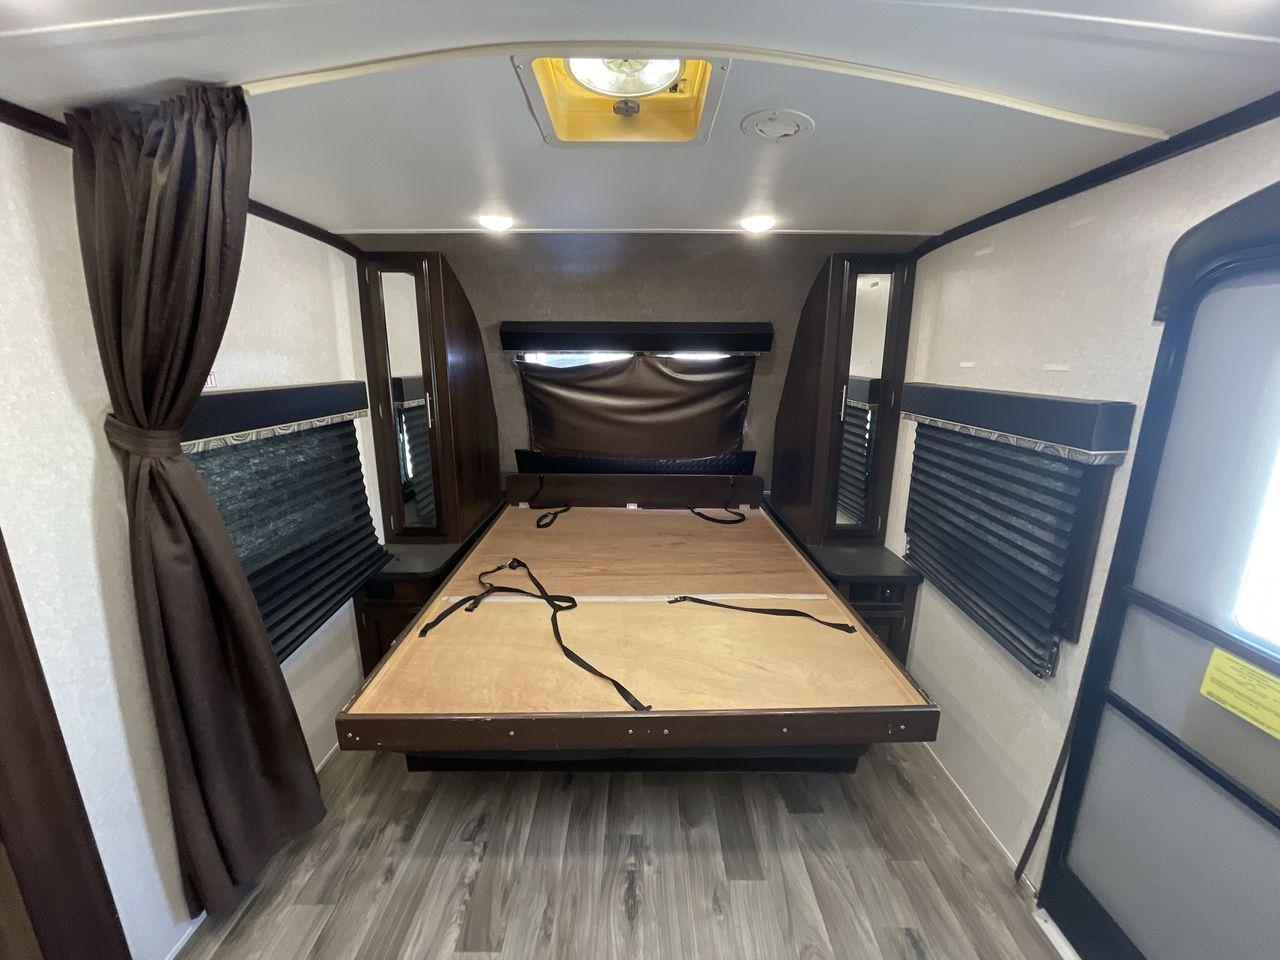 2018 WHITE JAYCO JAY FLIGHT 23MRB (1UJBJ0BN5J1) , Length: 28.17 ft | Dry Weight: 5,560 lbs. | Gross Weight: 7,250 lbs. | Slides: 1 transmission, located at 4319 N Main St, Cleburne, TX, 76033, (817) 678-5133, 32.385960, -97.391212 - The 2018 Jayco Jay Flight 23MRB is a travel trailer that encapsulates both compactness and luxury for unparalleled camping experiences. Spanning 28 feet in length, this model boasts a thoughtfully arranged interior featuring a single slide-out, seamlessly amplifying the living space. The Jay Flight - Photo #17